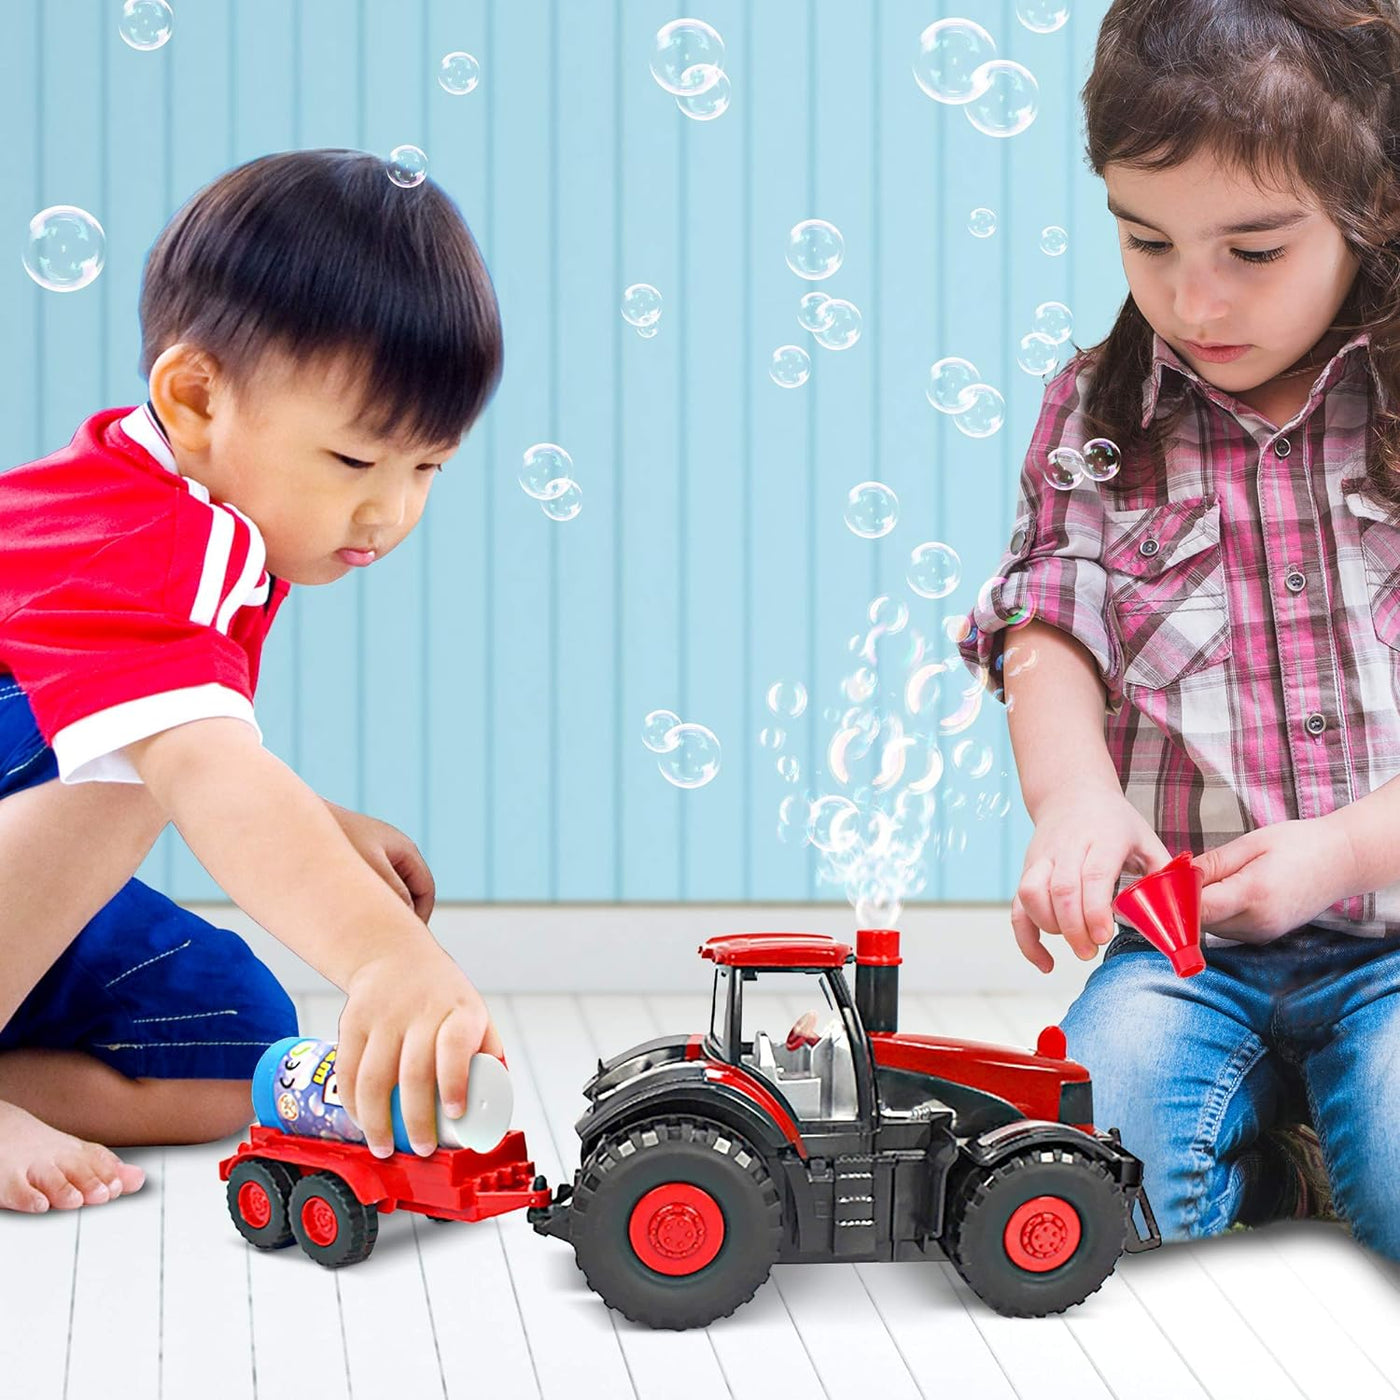 ArtCreativity Bump & Go Bubble Blowing Farm Tractor Toy Truck with Lights & Sounds, and Action for Toddlers Boys Girls Ages 1, 2, 3, 4, 5 - Funnel & Bubble Solution Included